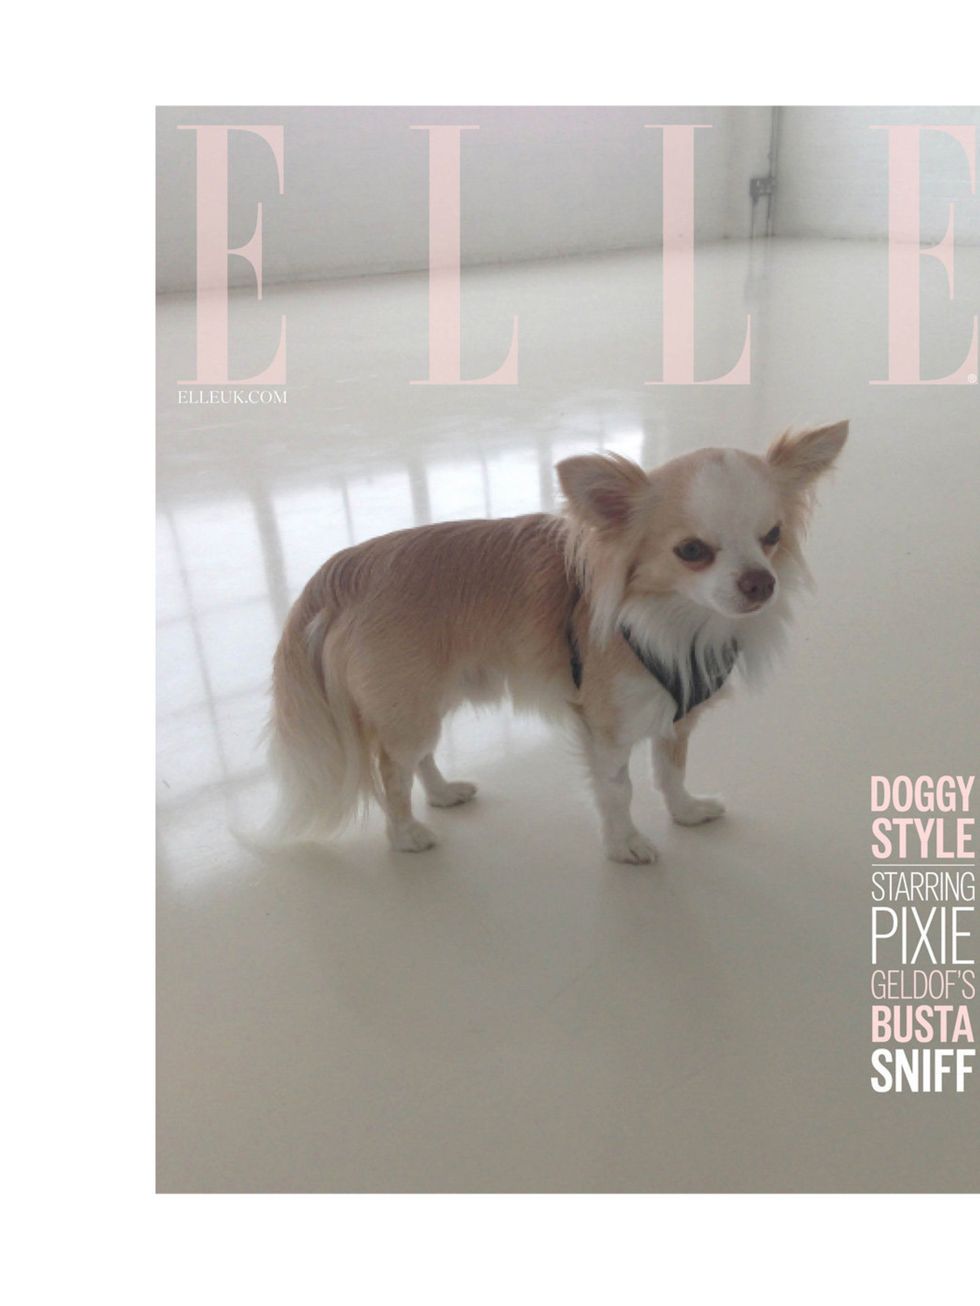 <p>'Doggy style... Starring <a href="http://www.elleuk.com/star-style/celebrity-style-files/pixie-geldof">Pixie Geldof</a>'s Busta Sniff.' </p><p><a href="http://www.elleuk.com/elle-tv/cover-stars/elle-magazine/pixie-geldof-elle-behind-the-cover-video"></